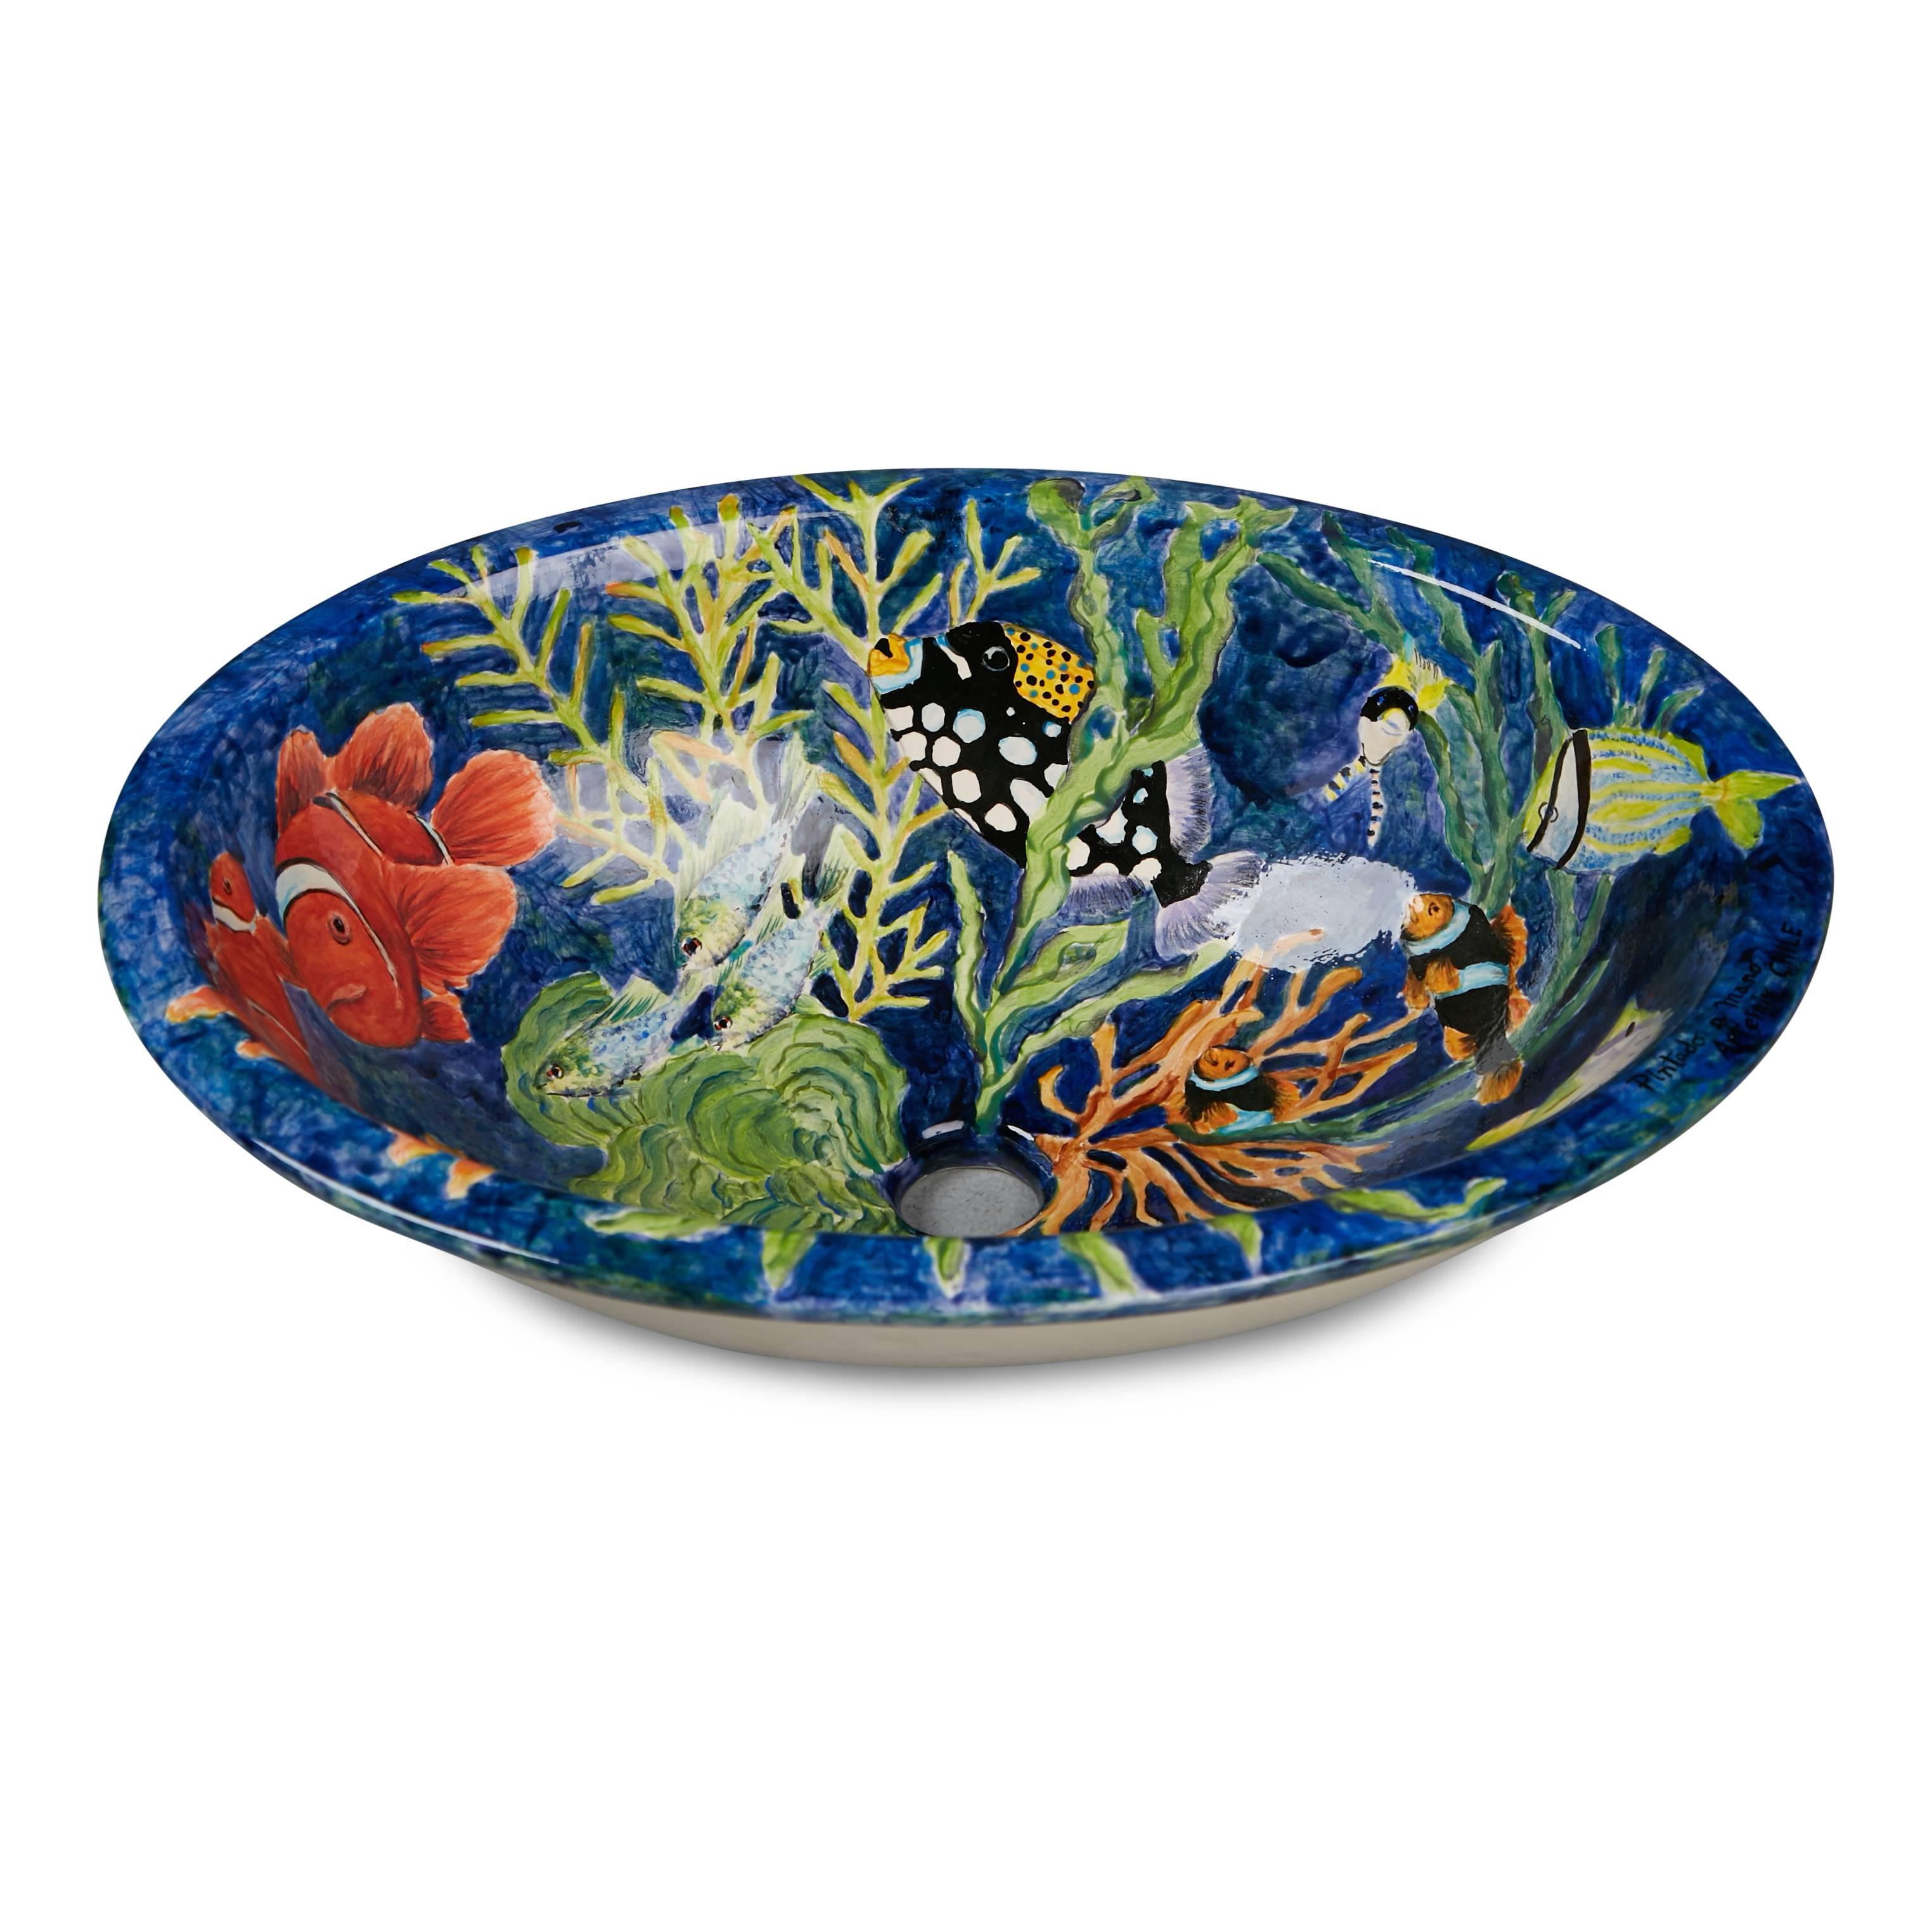 Beautifully hand painted porcelain oval sink. This aquatic scene has been executed with fine detail, portraying an array of colorful fish and plant life on a cobalt blue background. Painted on the corner is Pintado a Mano Artemix Chile. 

This